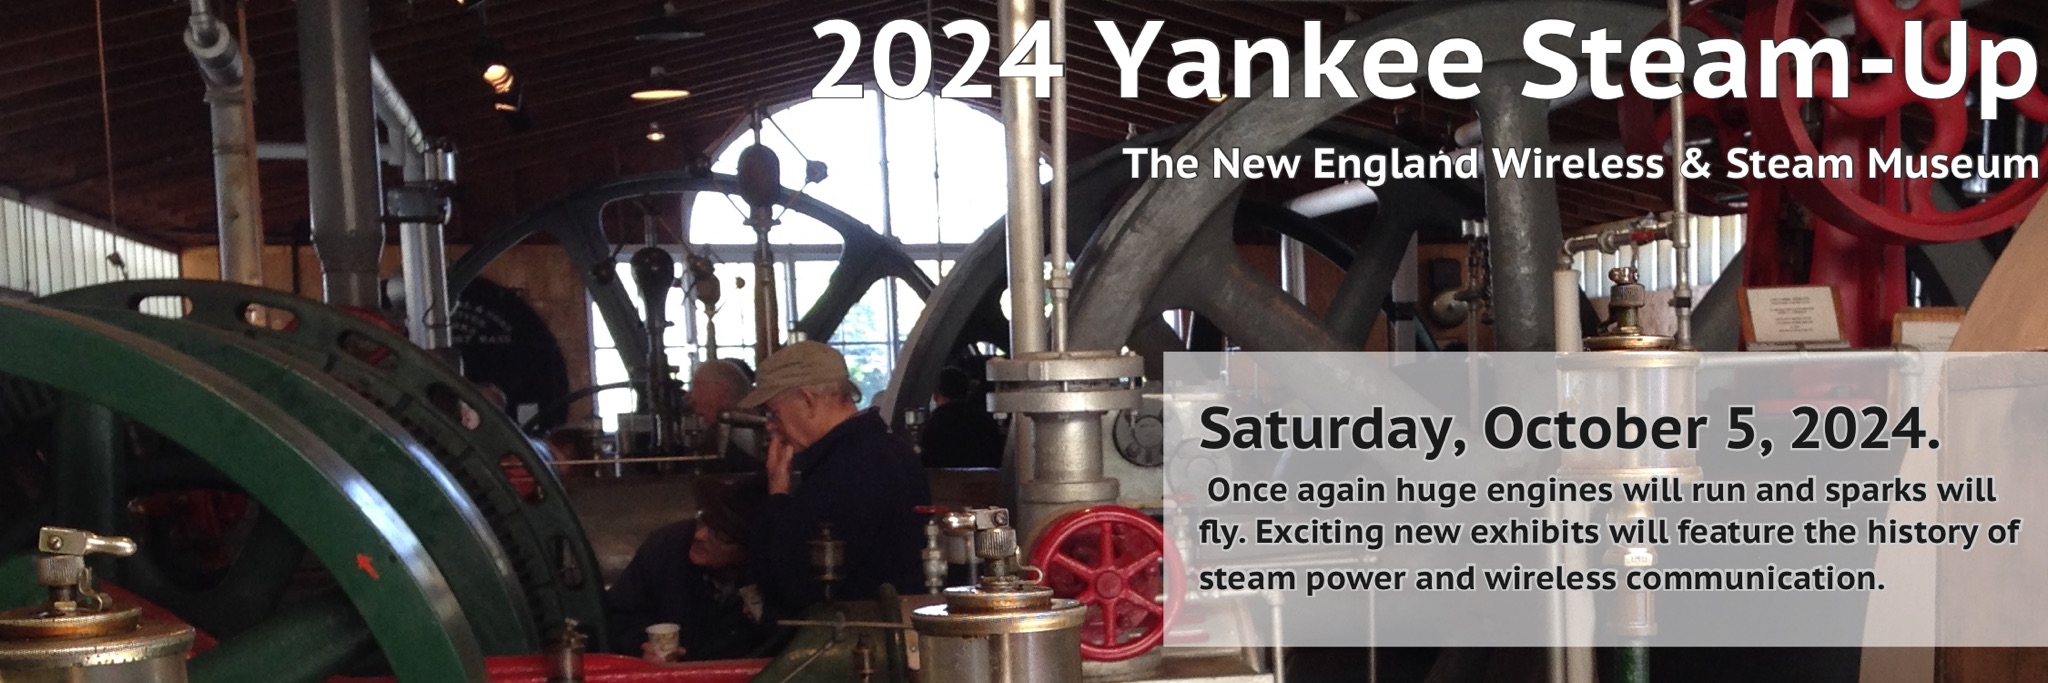 Steam-Up 2023 poster